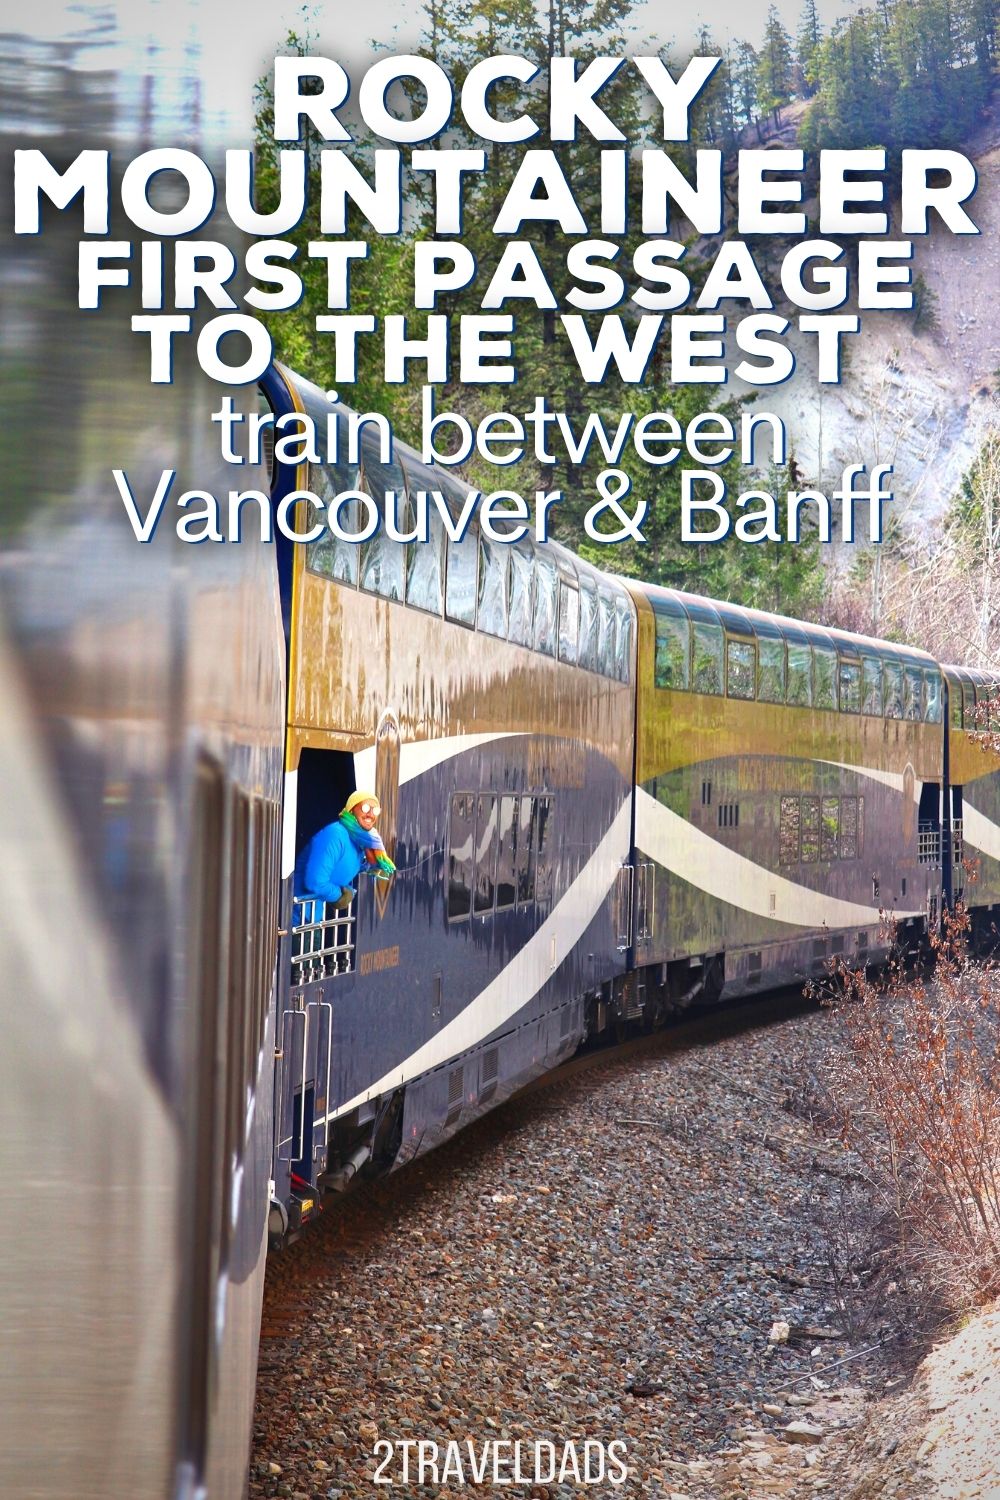 Taking the train from Vancouver to Banff is an awesome experience on the Rocky Mountaineer. From top notch dining to seeing wildlife from the train, this is everything you need to know to plan this unique train journey.